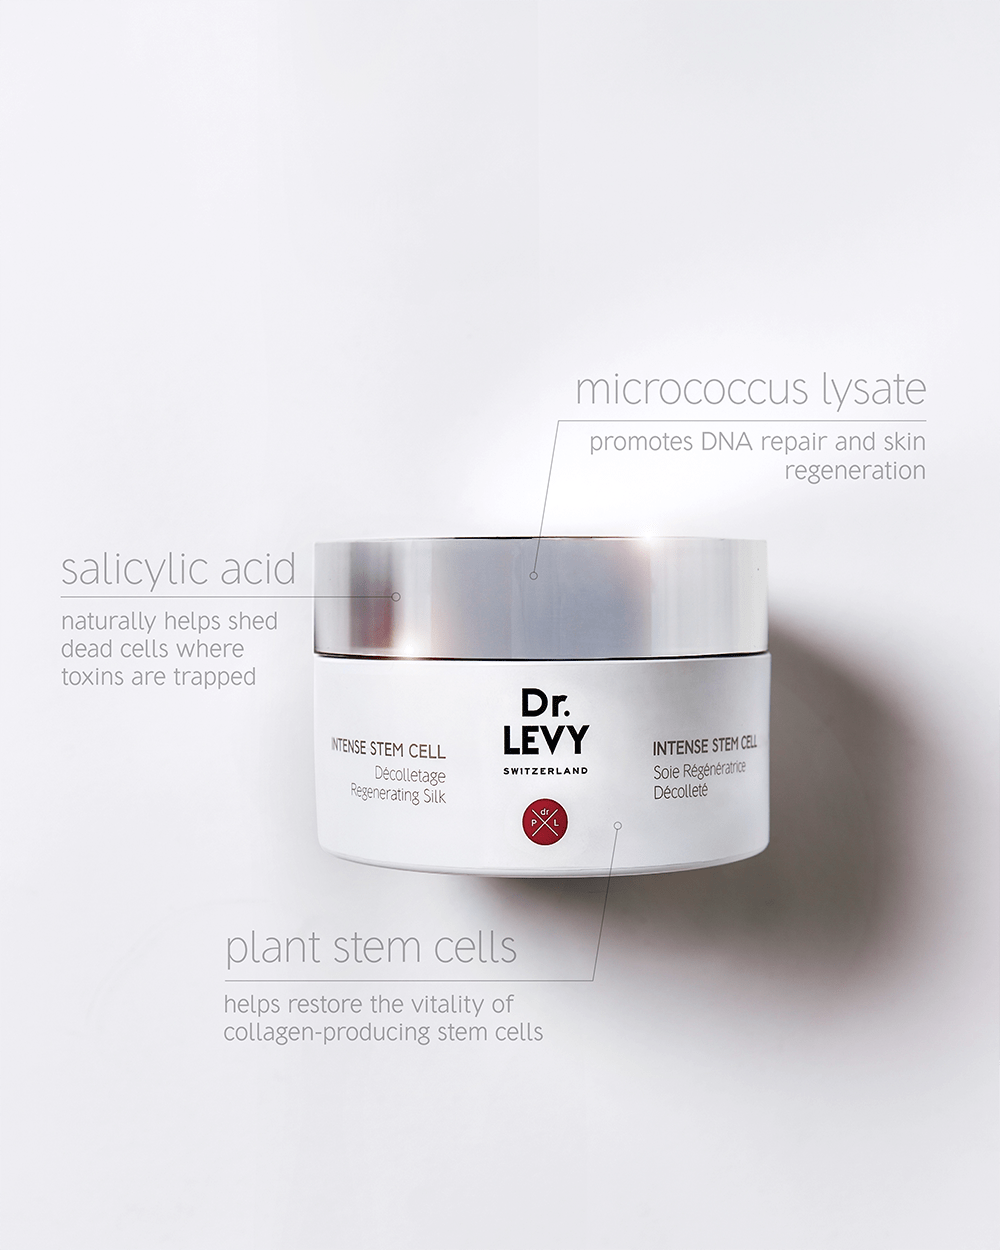 dr-levy-switzerland-skin-care-beauty-product-decolletage-regenerating-silk-skin-benefits.png